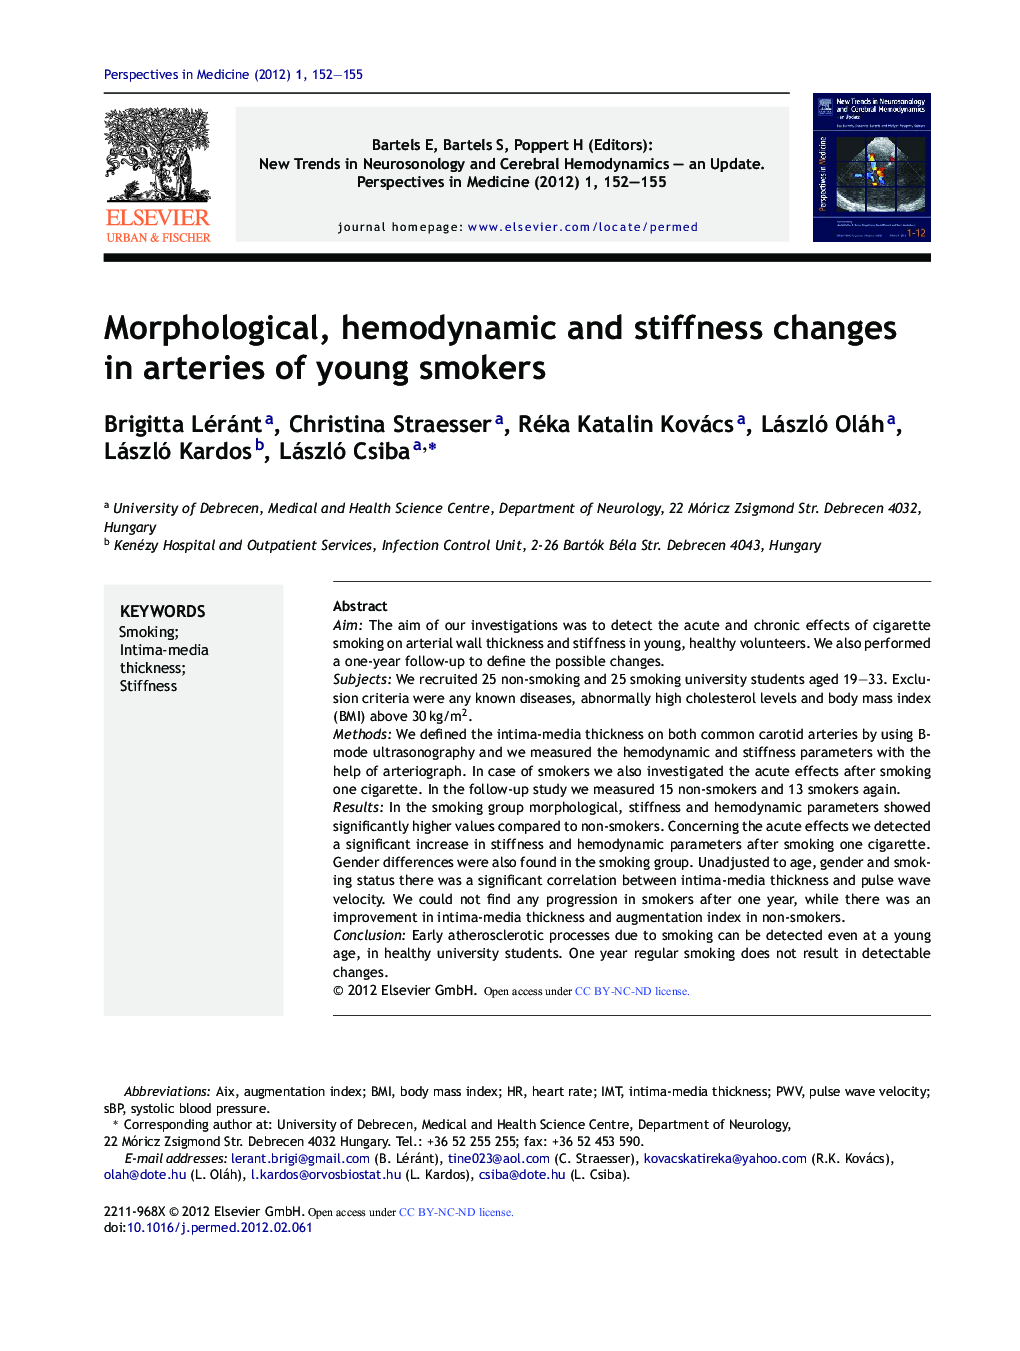 Morphological, hemodynamic and stiffness changes in arteries of young smokers